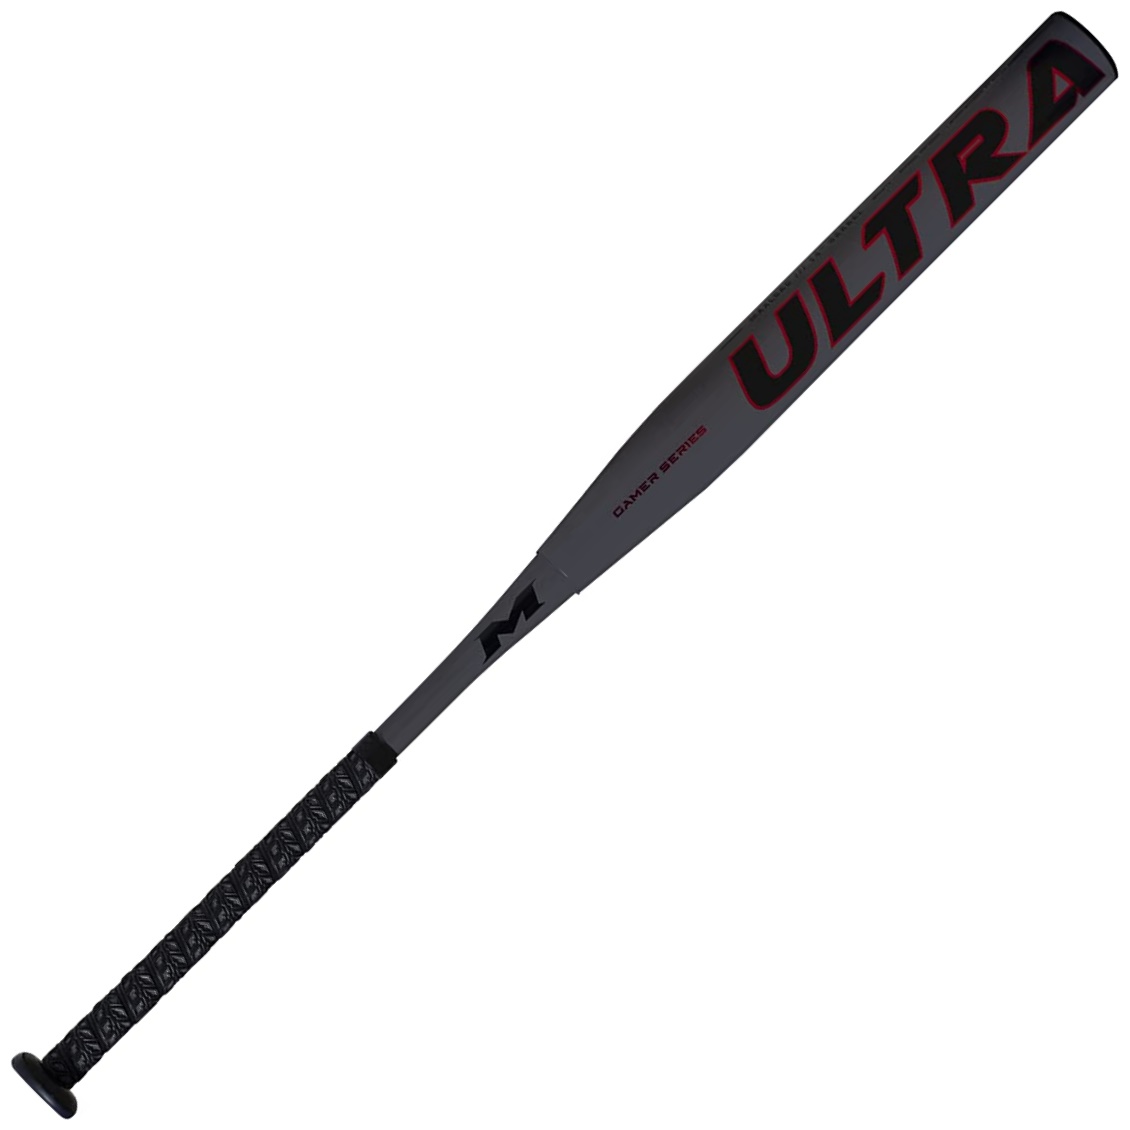 miken-ultra-gamer-series-two-piece-maxload-14-barrel-ssusa-slowpitch-softball-bat-34-inch-26-oz MUL21S-3-26   <span data-mce-fragment=1>The New Miken Ultra Gamer Series offers one of the